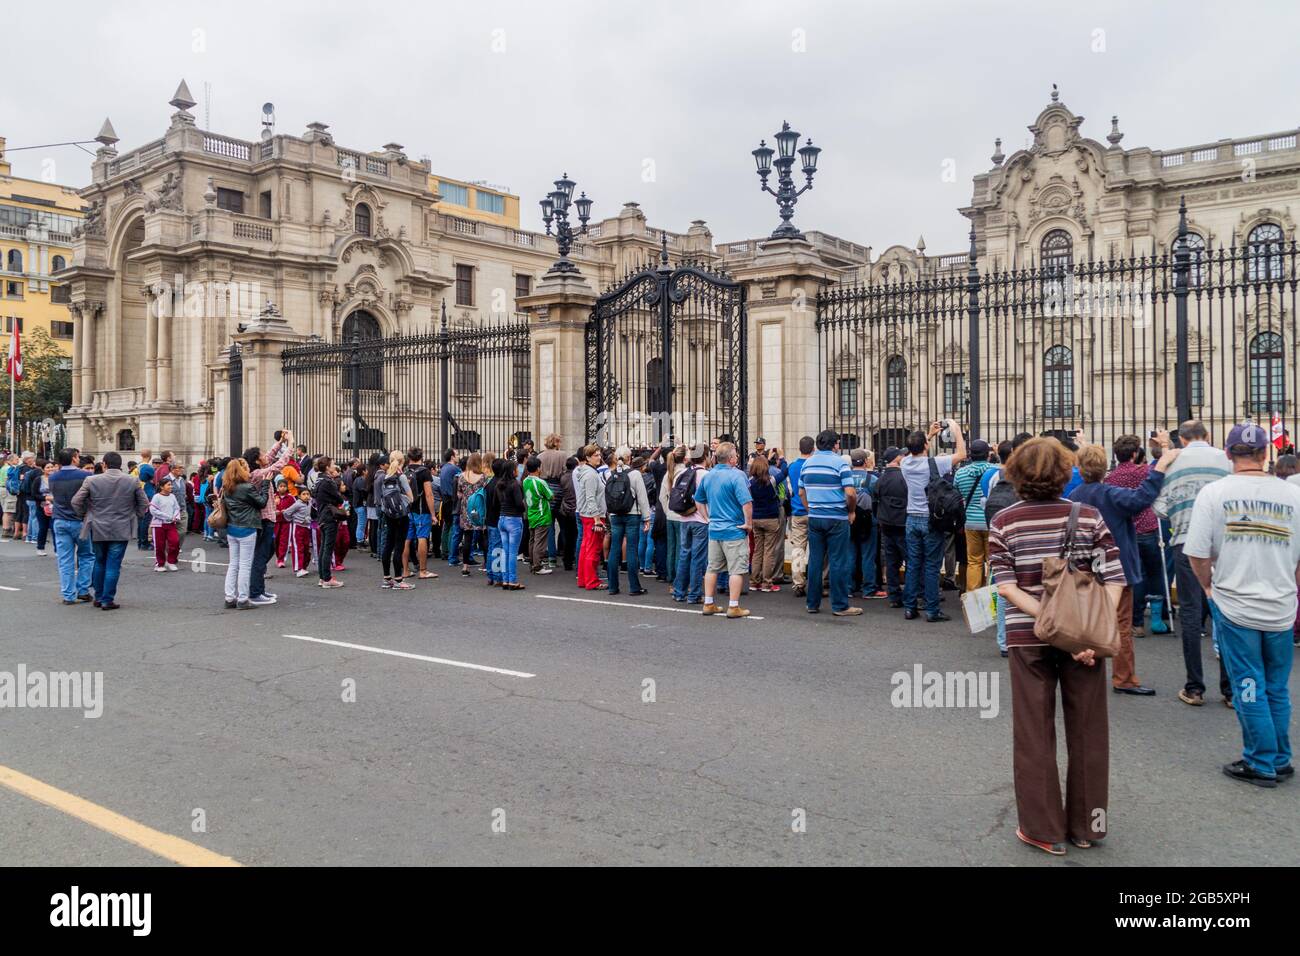 LIMA, PERU - JUNE 4, 2015: People watch changing the guards in front of Palacio de Gobierno (Government palace) in Lima, Peru. Stock Photo